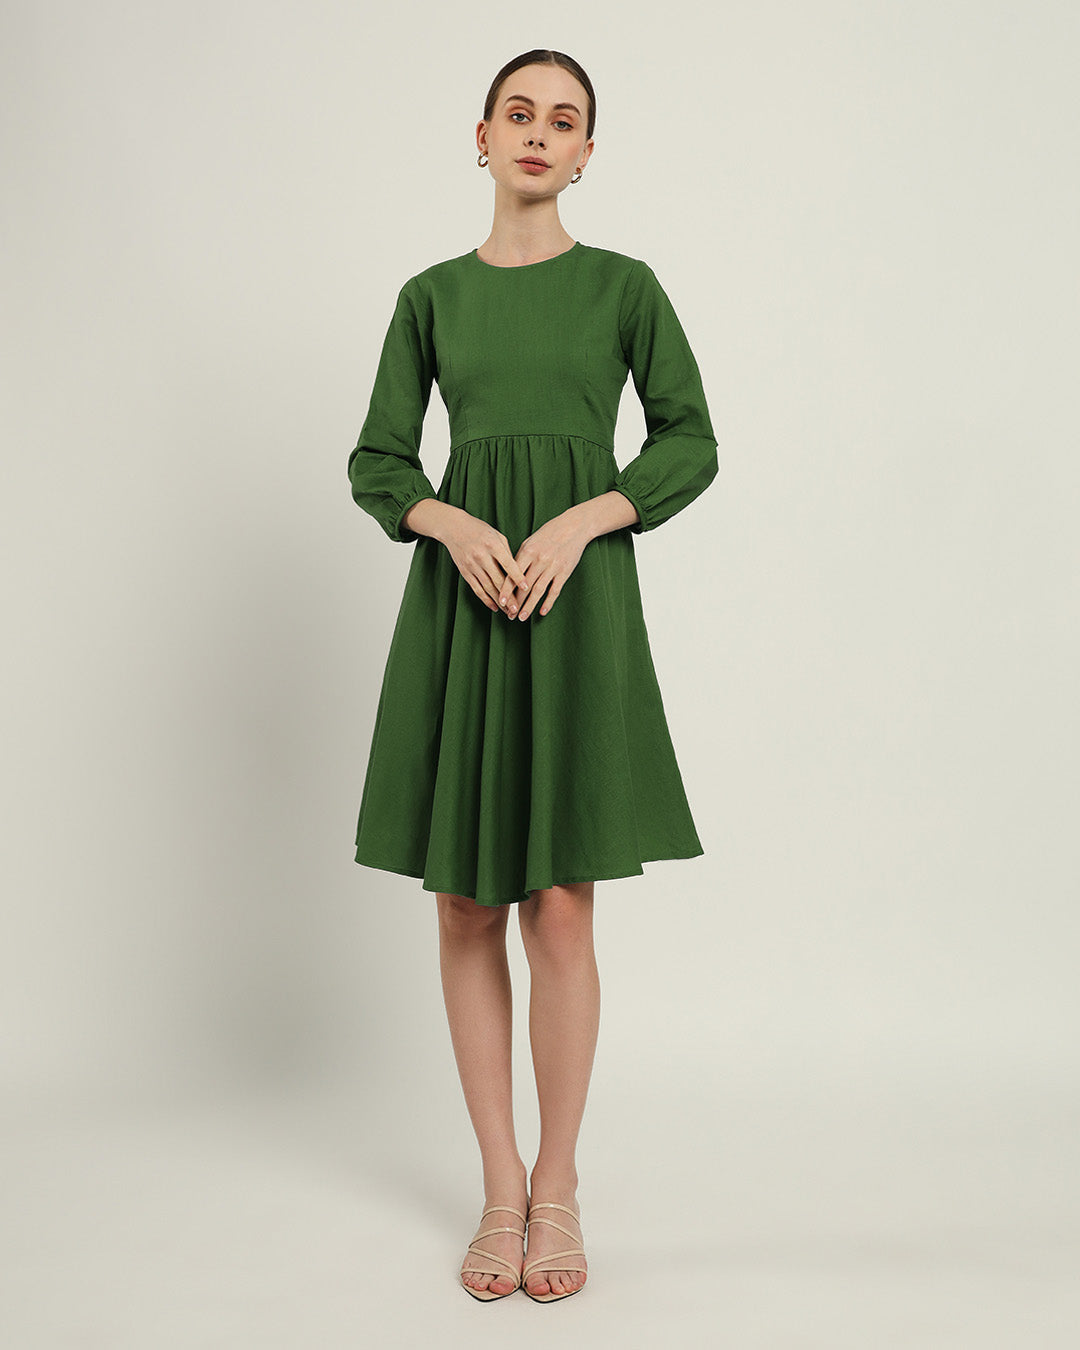 The Exeter Emerald Dress